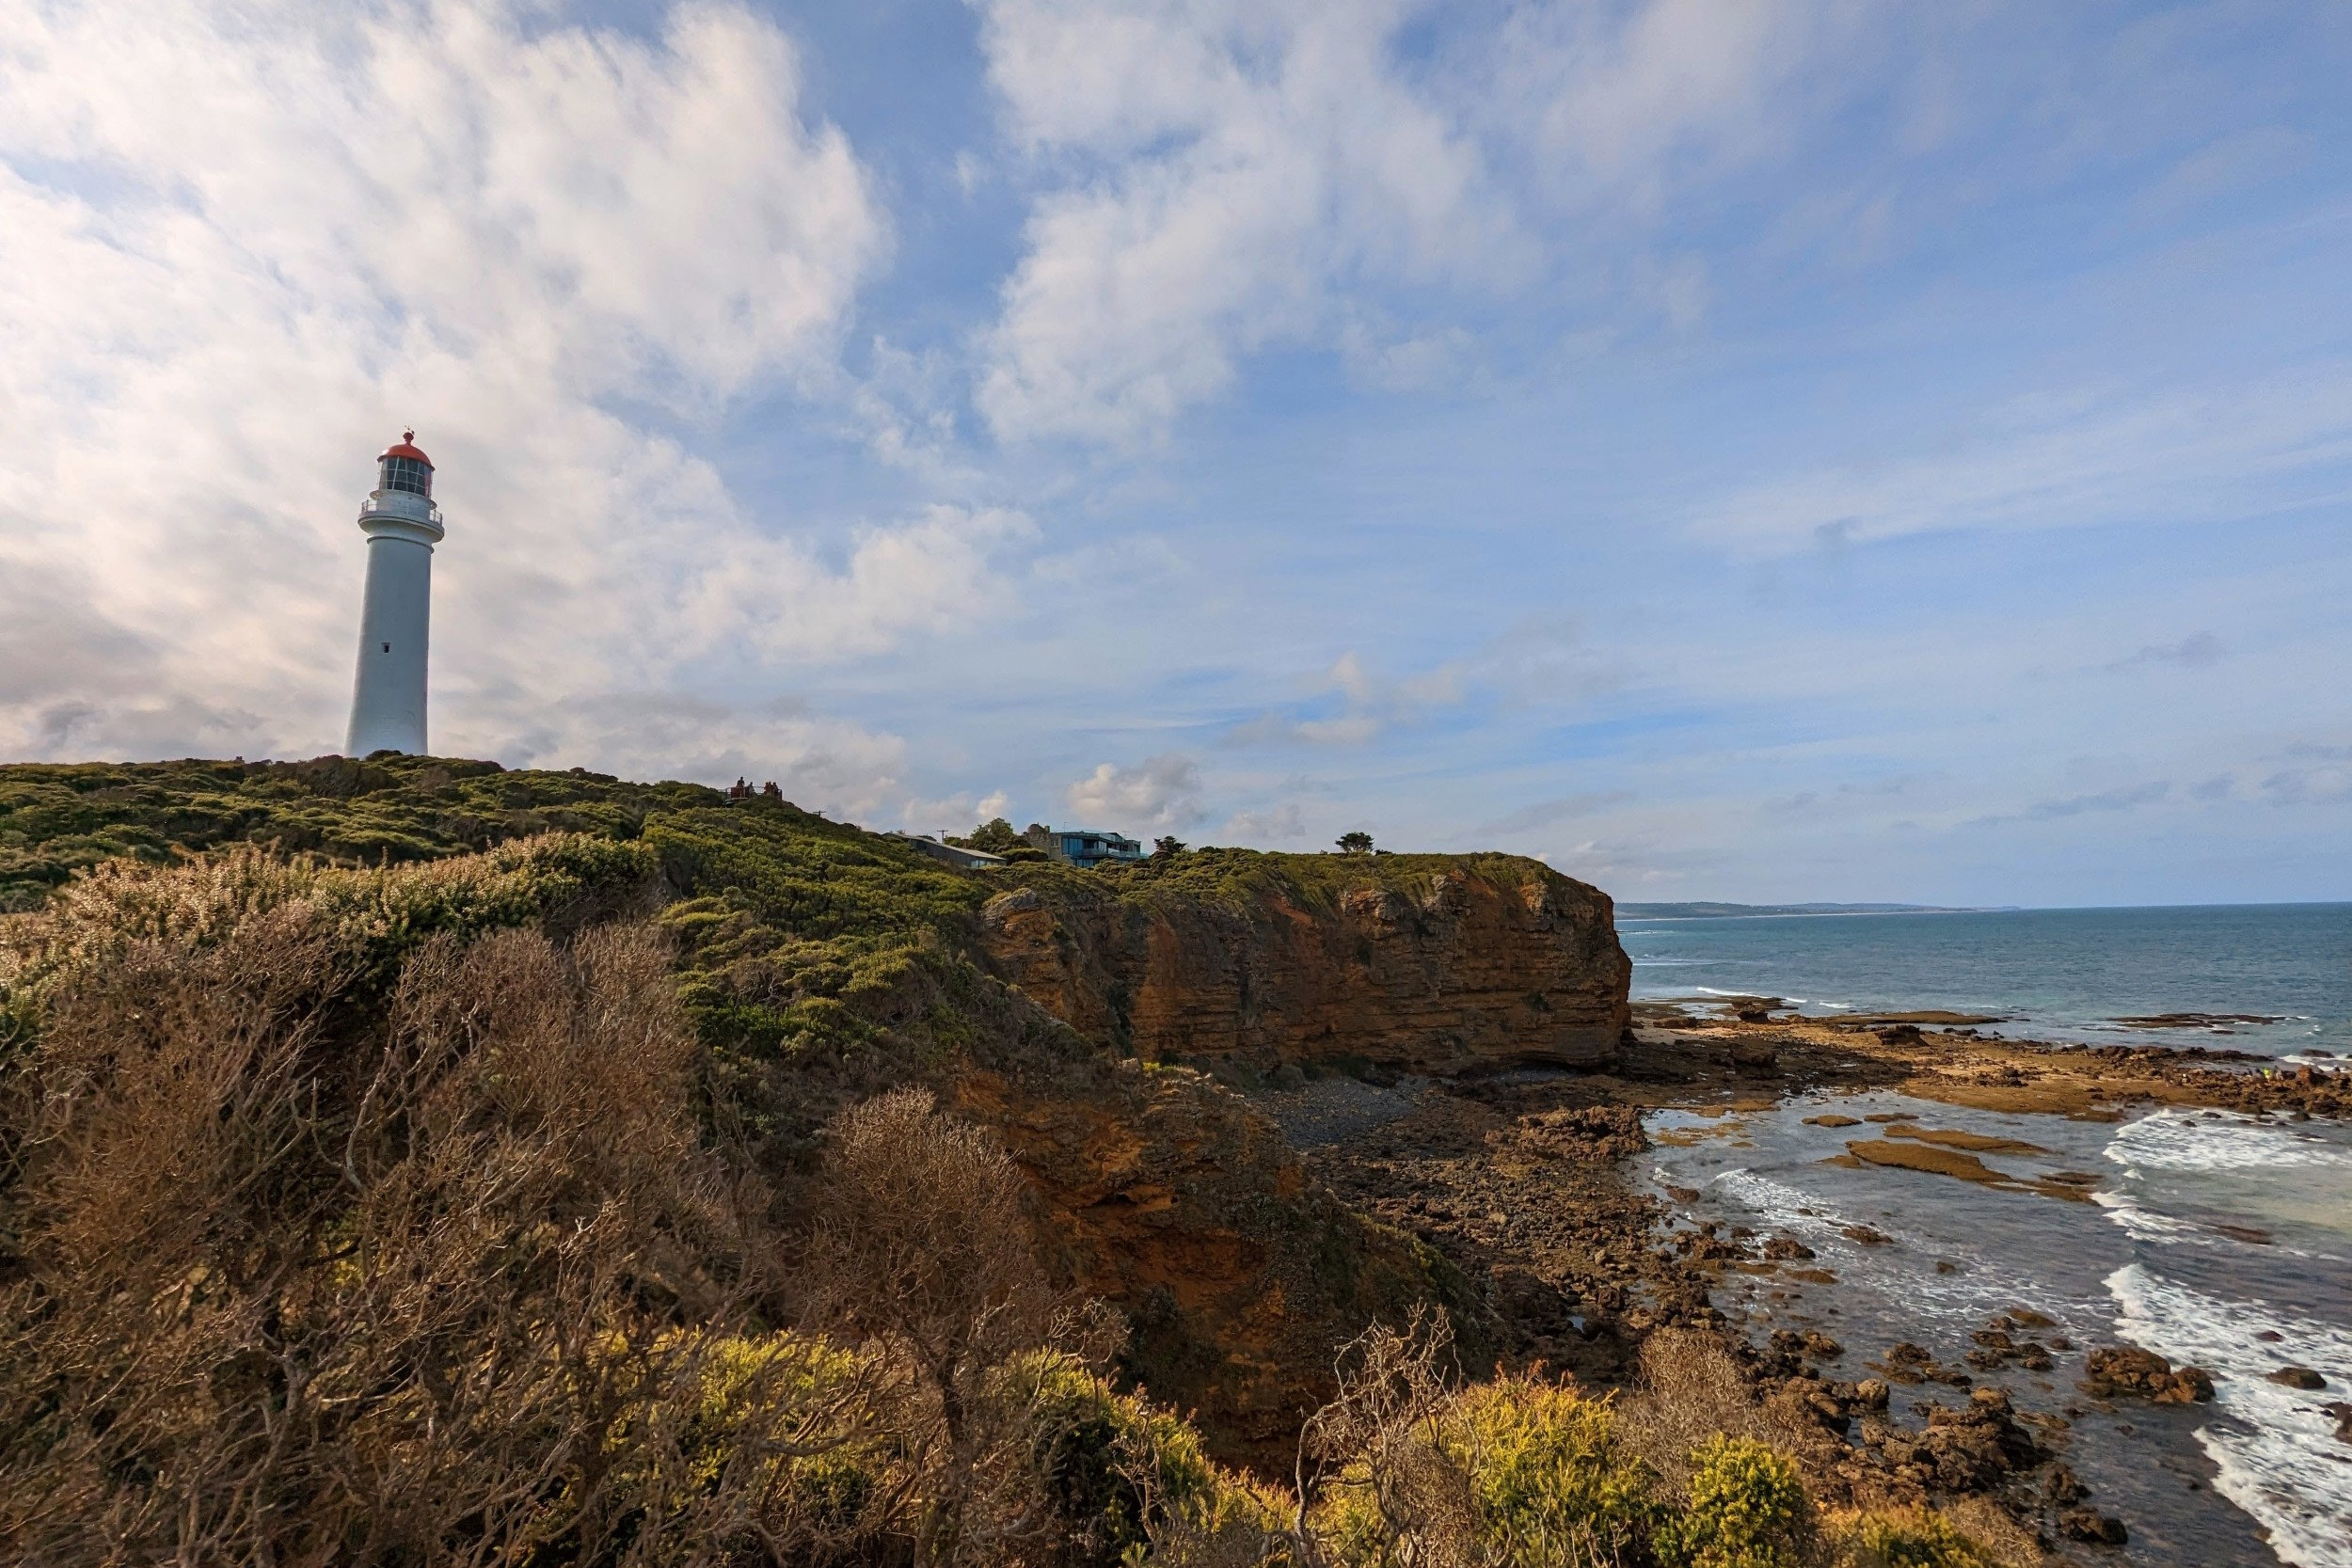 Lighthouse on weathered cliff face, overlooking rocky ocean bay below. Trees in the foreground, blue sky with white clouds above